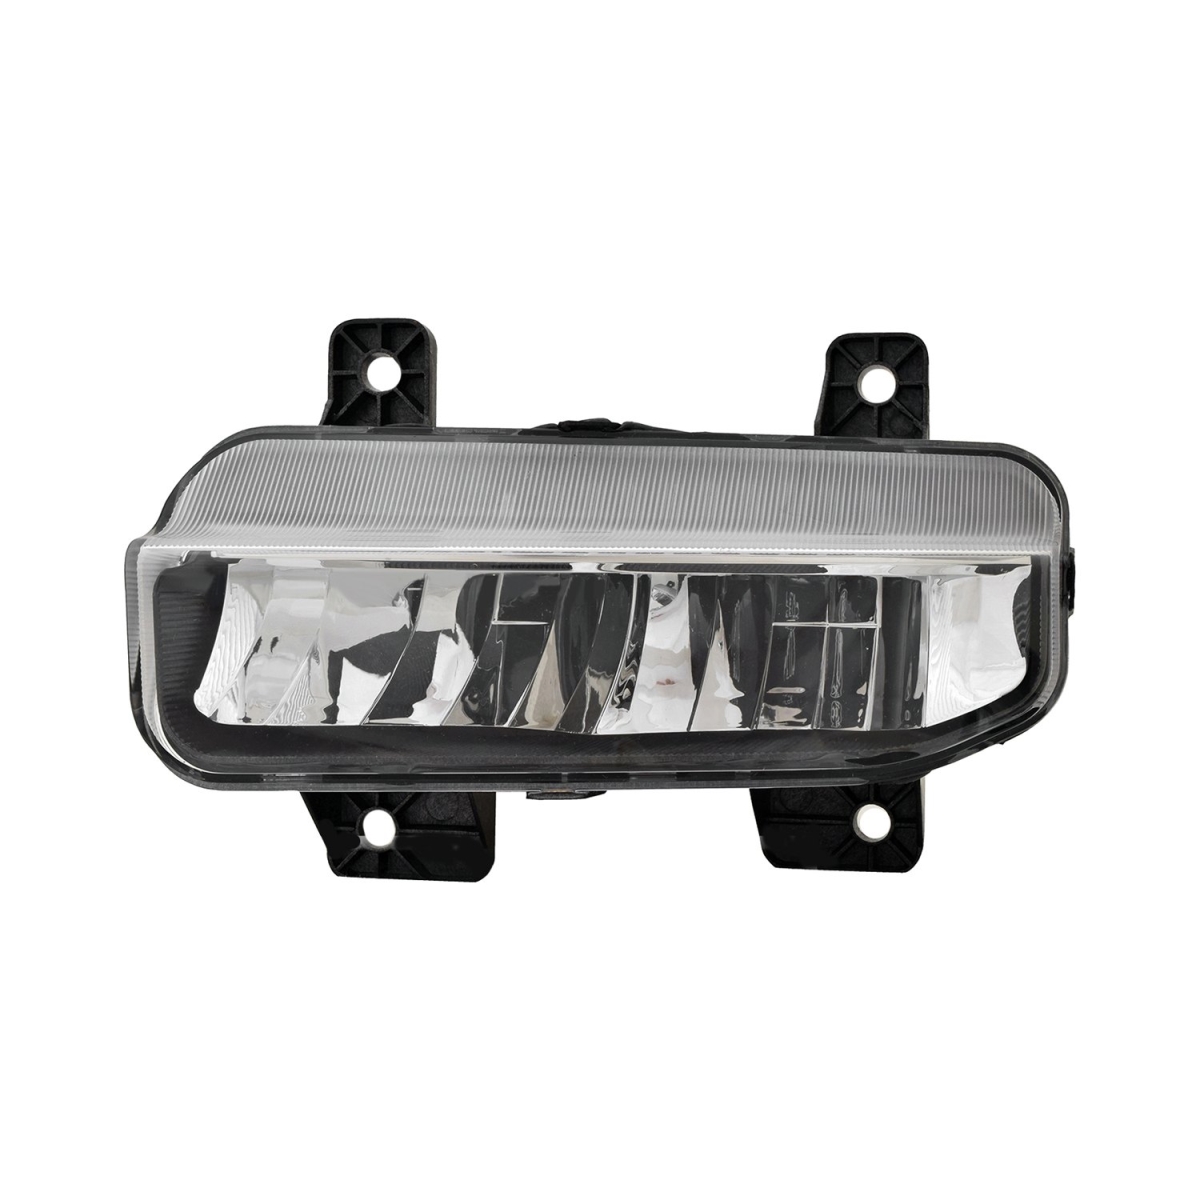 Picture of TYC TYC19-6230-00 Driver Side Replacement Fog LED Light for 2019-2020 RAM 1500